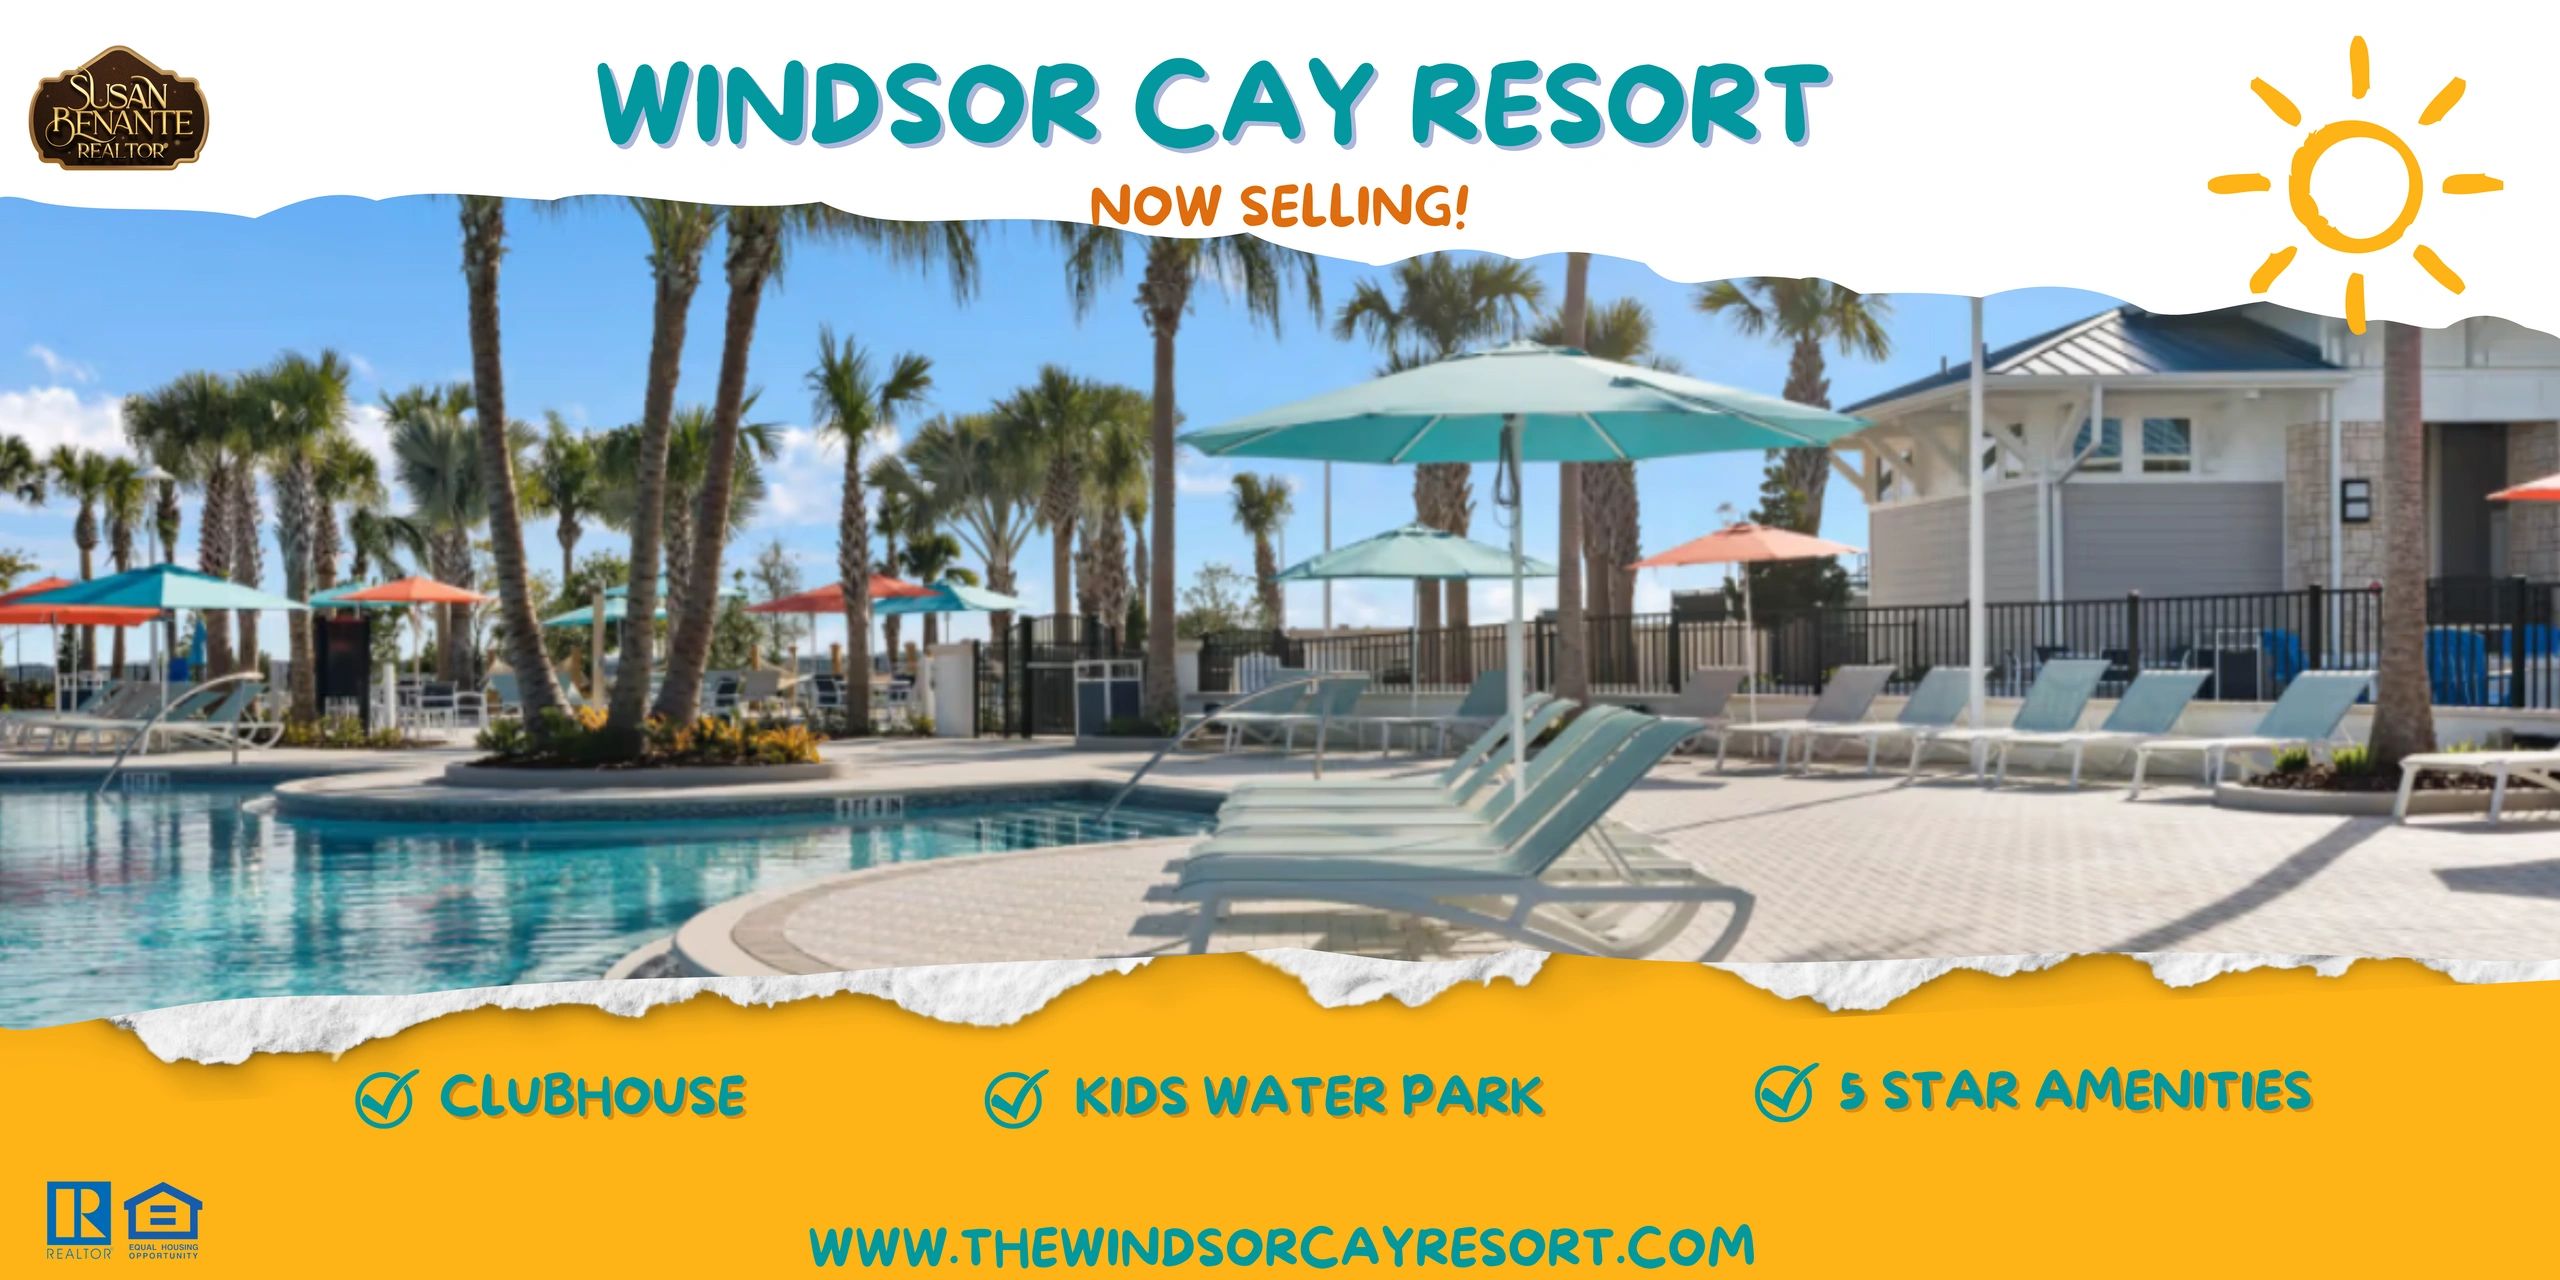 Windsor Cay Resort is now selling vacation homes for sale near Disney Orlando FL